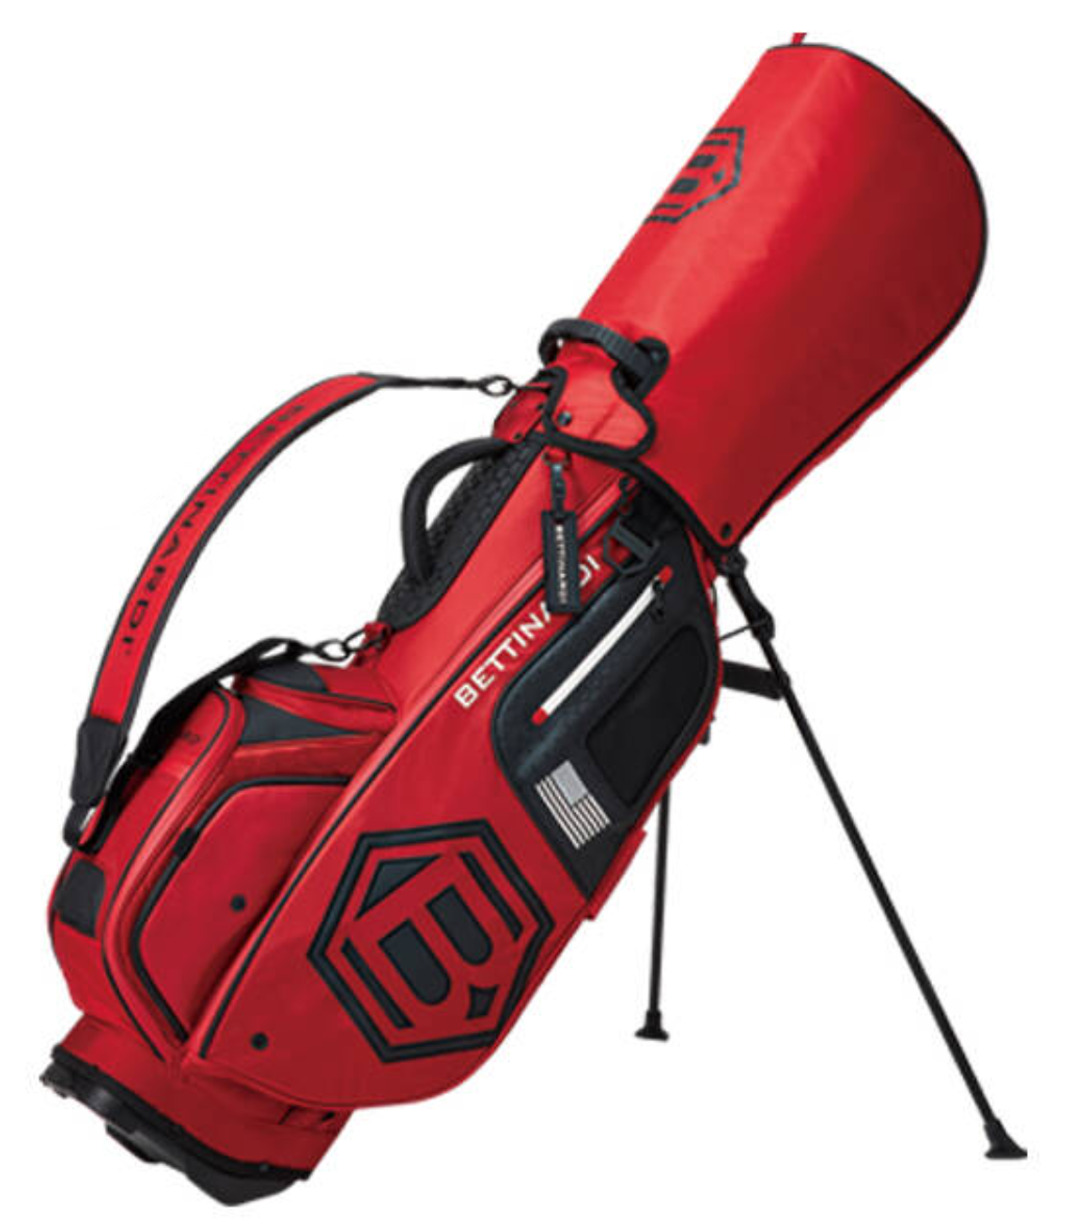 STB-HB3 Stand Golf Bag Bettinardi Red Color Authentic